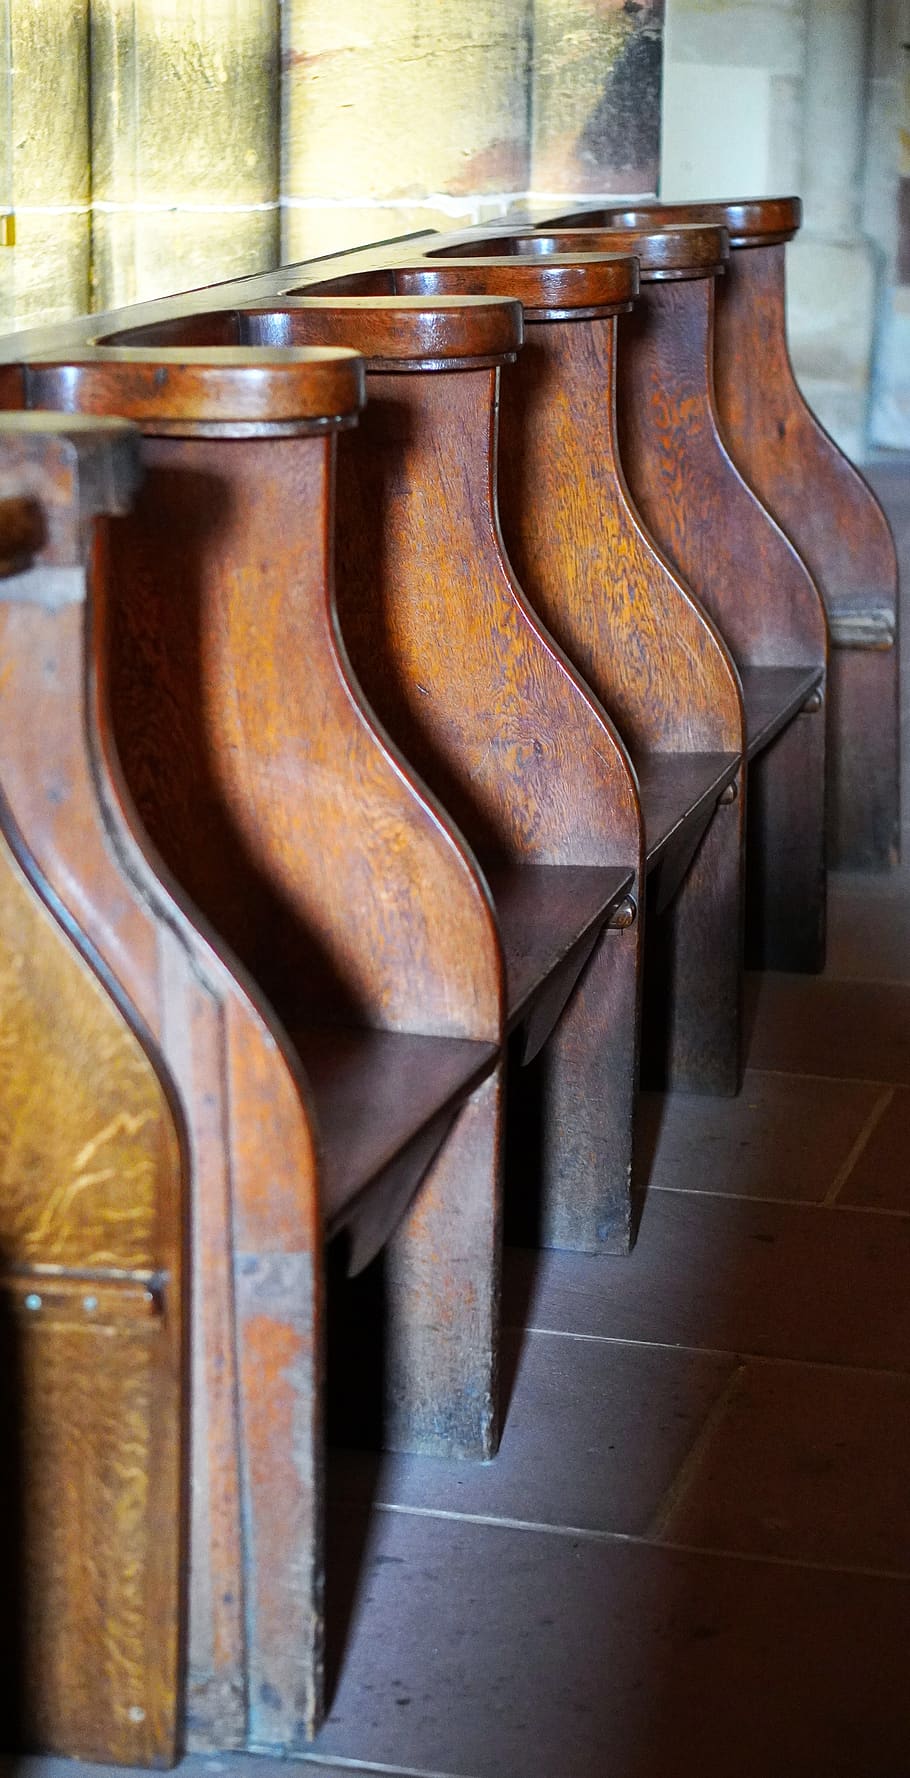 church, pew, church pews, religion, architecture, chapel, bank, nave, indoors, in a row